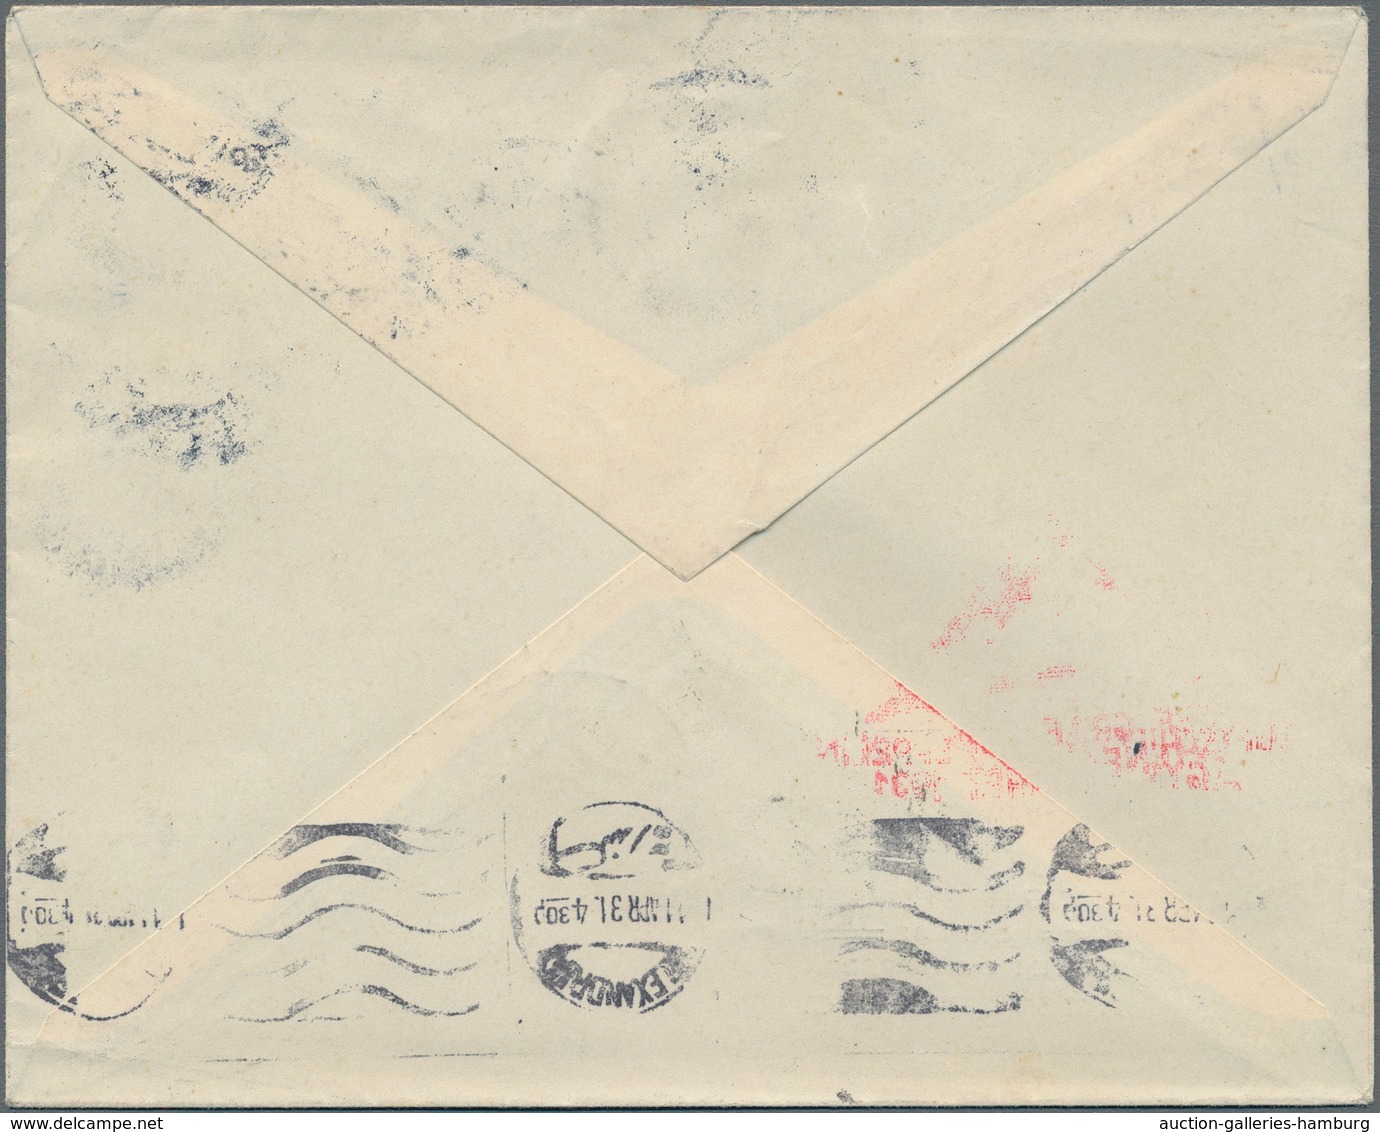 Zeppelinpost Europa: 1931, Trip To Egypt, Dutch Mail, Cover Bearing Attractive Franking From "AMSTER - Sonstige - Europa